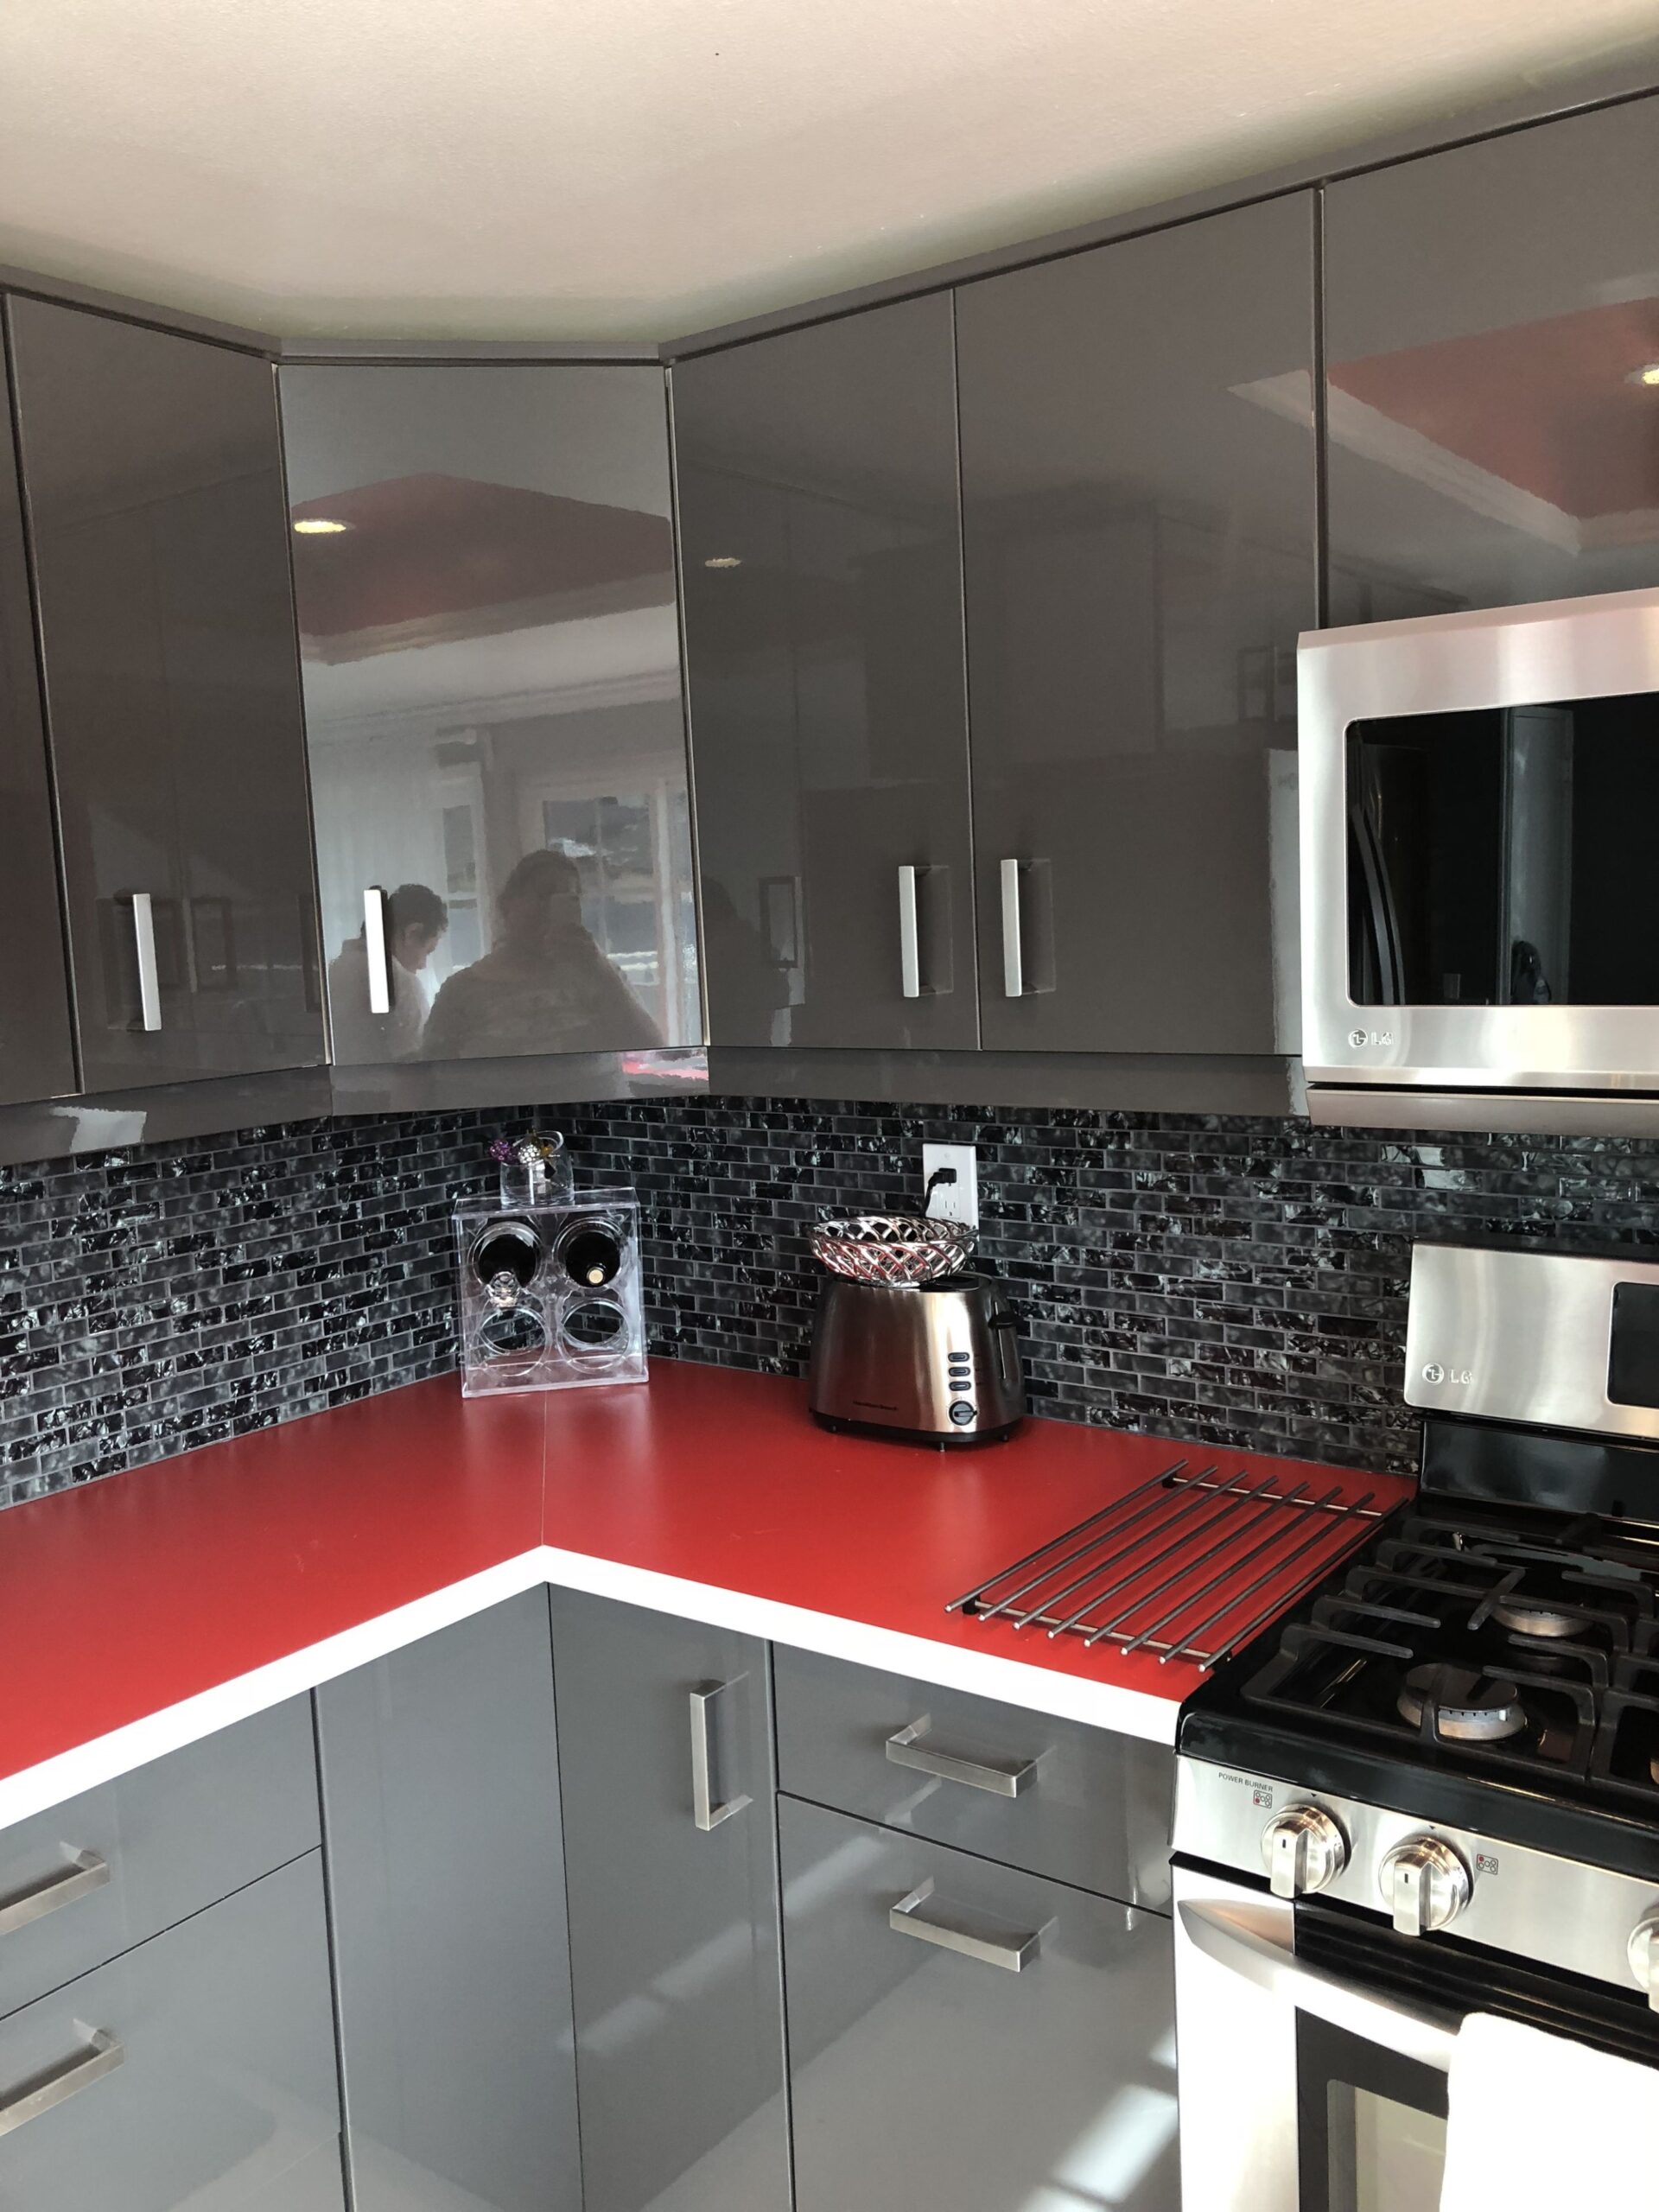 Beautiful kitchen with glossy grey cabinets and red counter top  - grey and red kitchen ideas